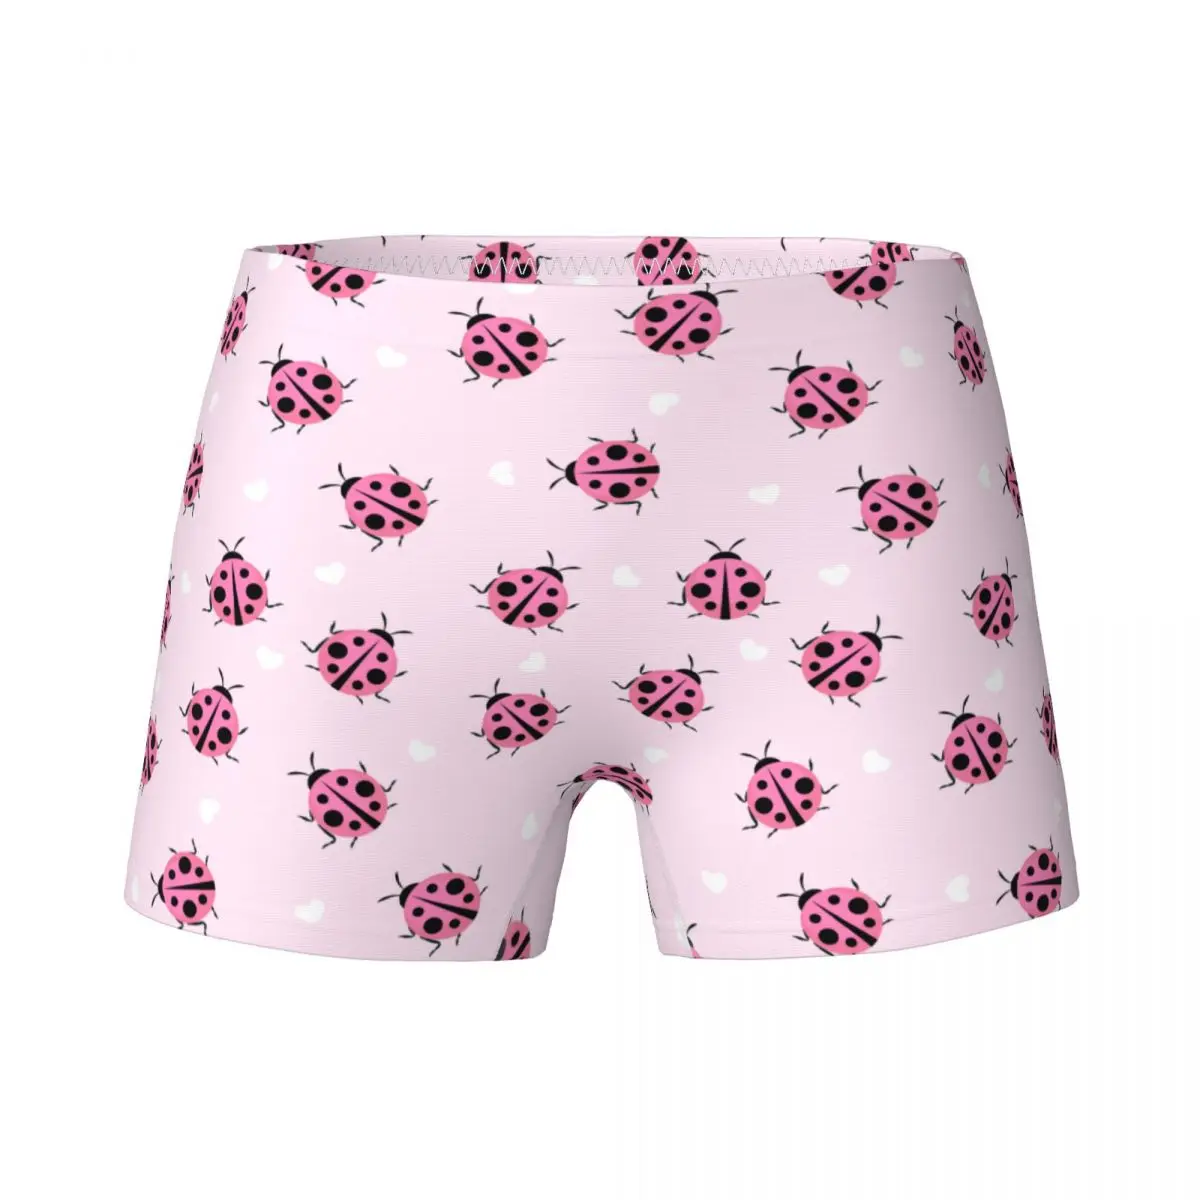 

Girls Ladybug Ladybird Insect Lover Boxers Children's Cotton Pretty Underwear Kids Teenage Underpants Soft Shorts Size 4T-15T